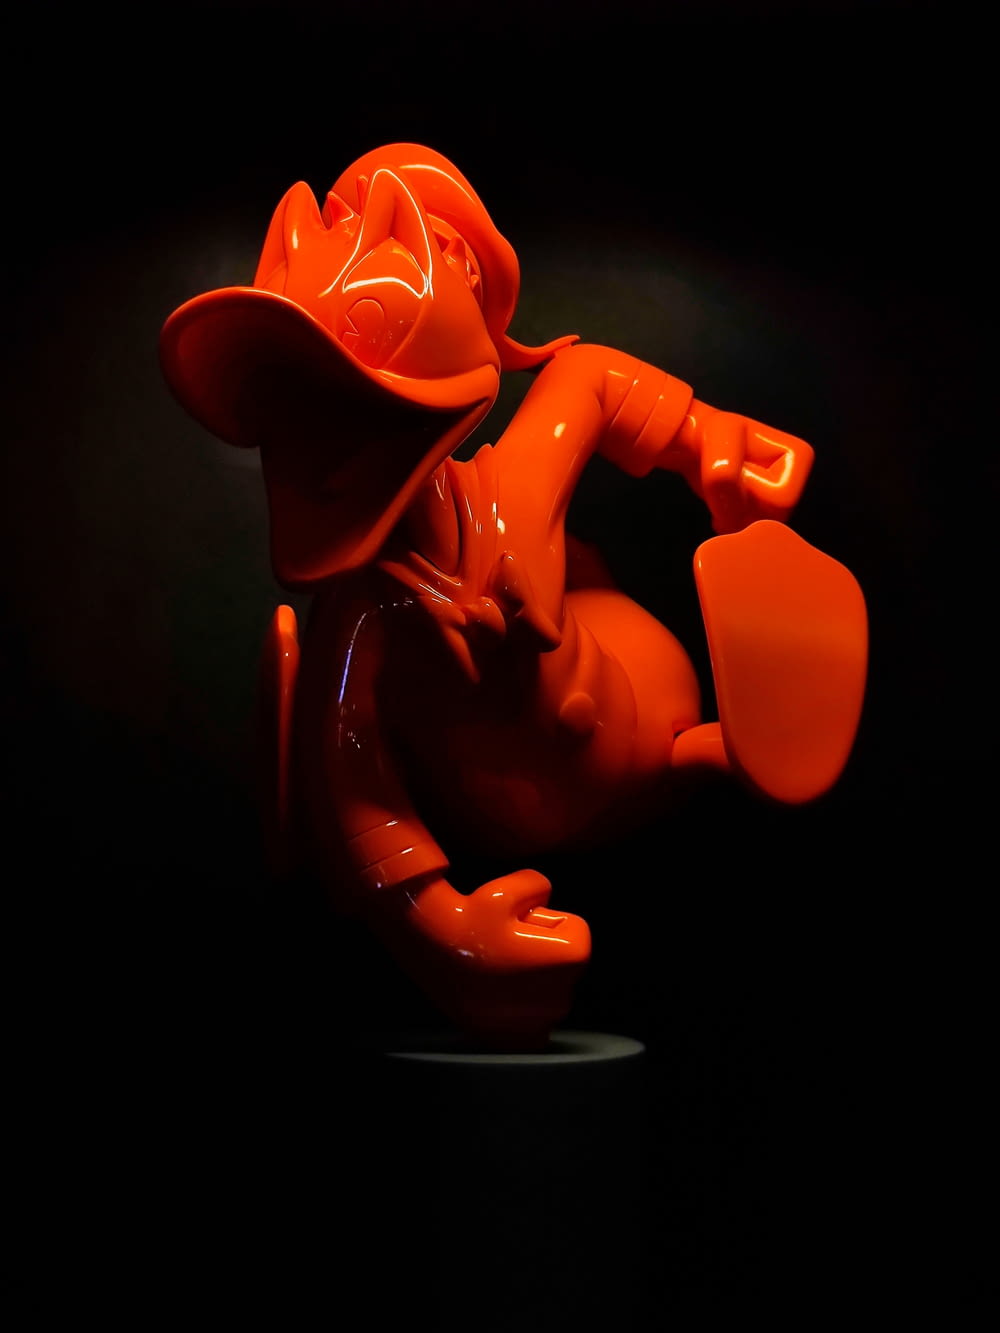 an orange toy is posed in the dark